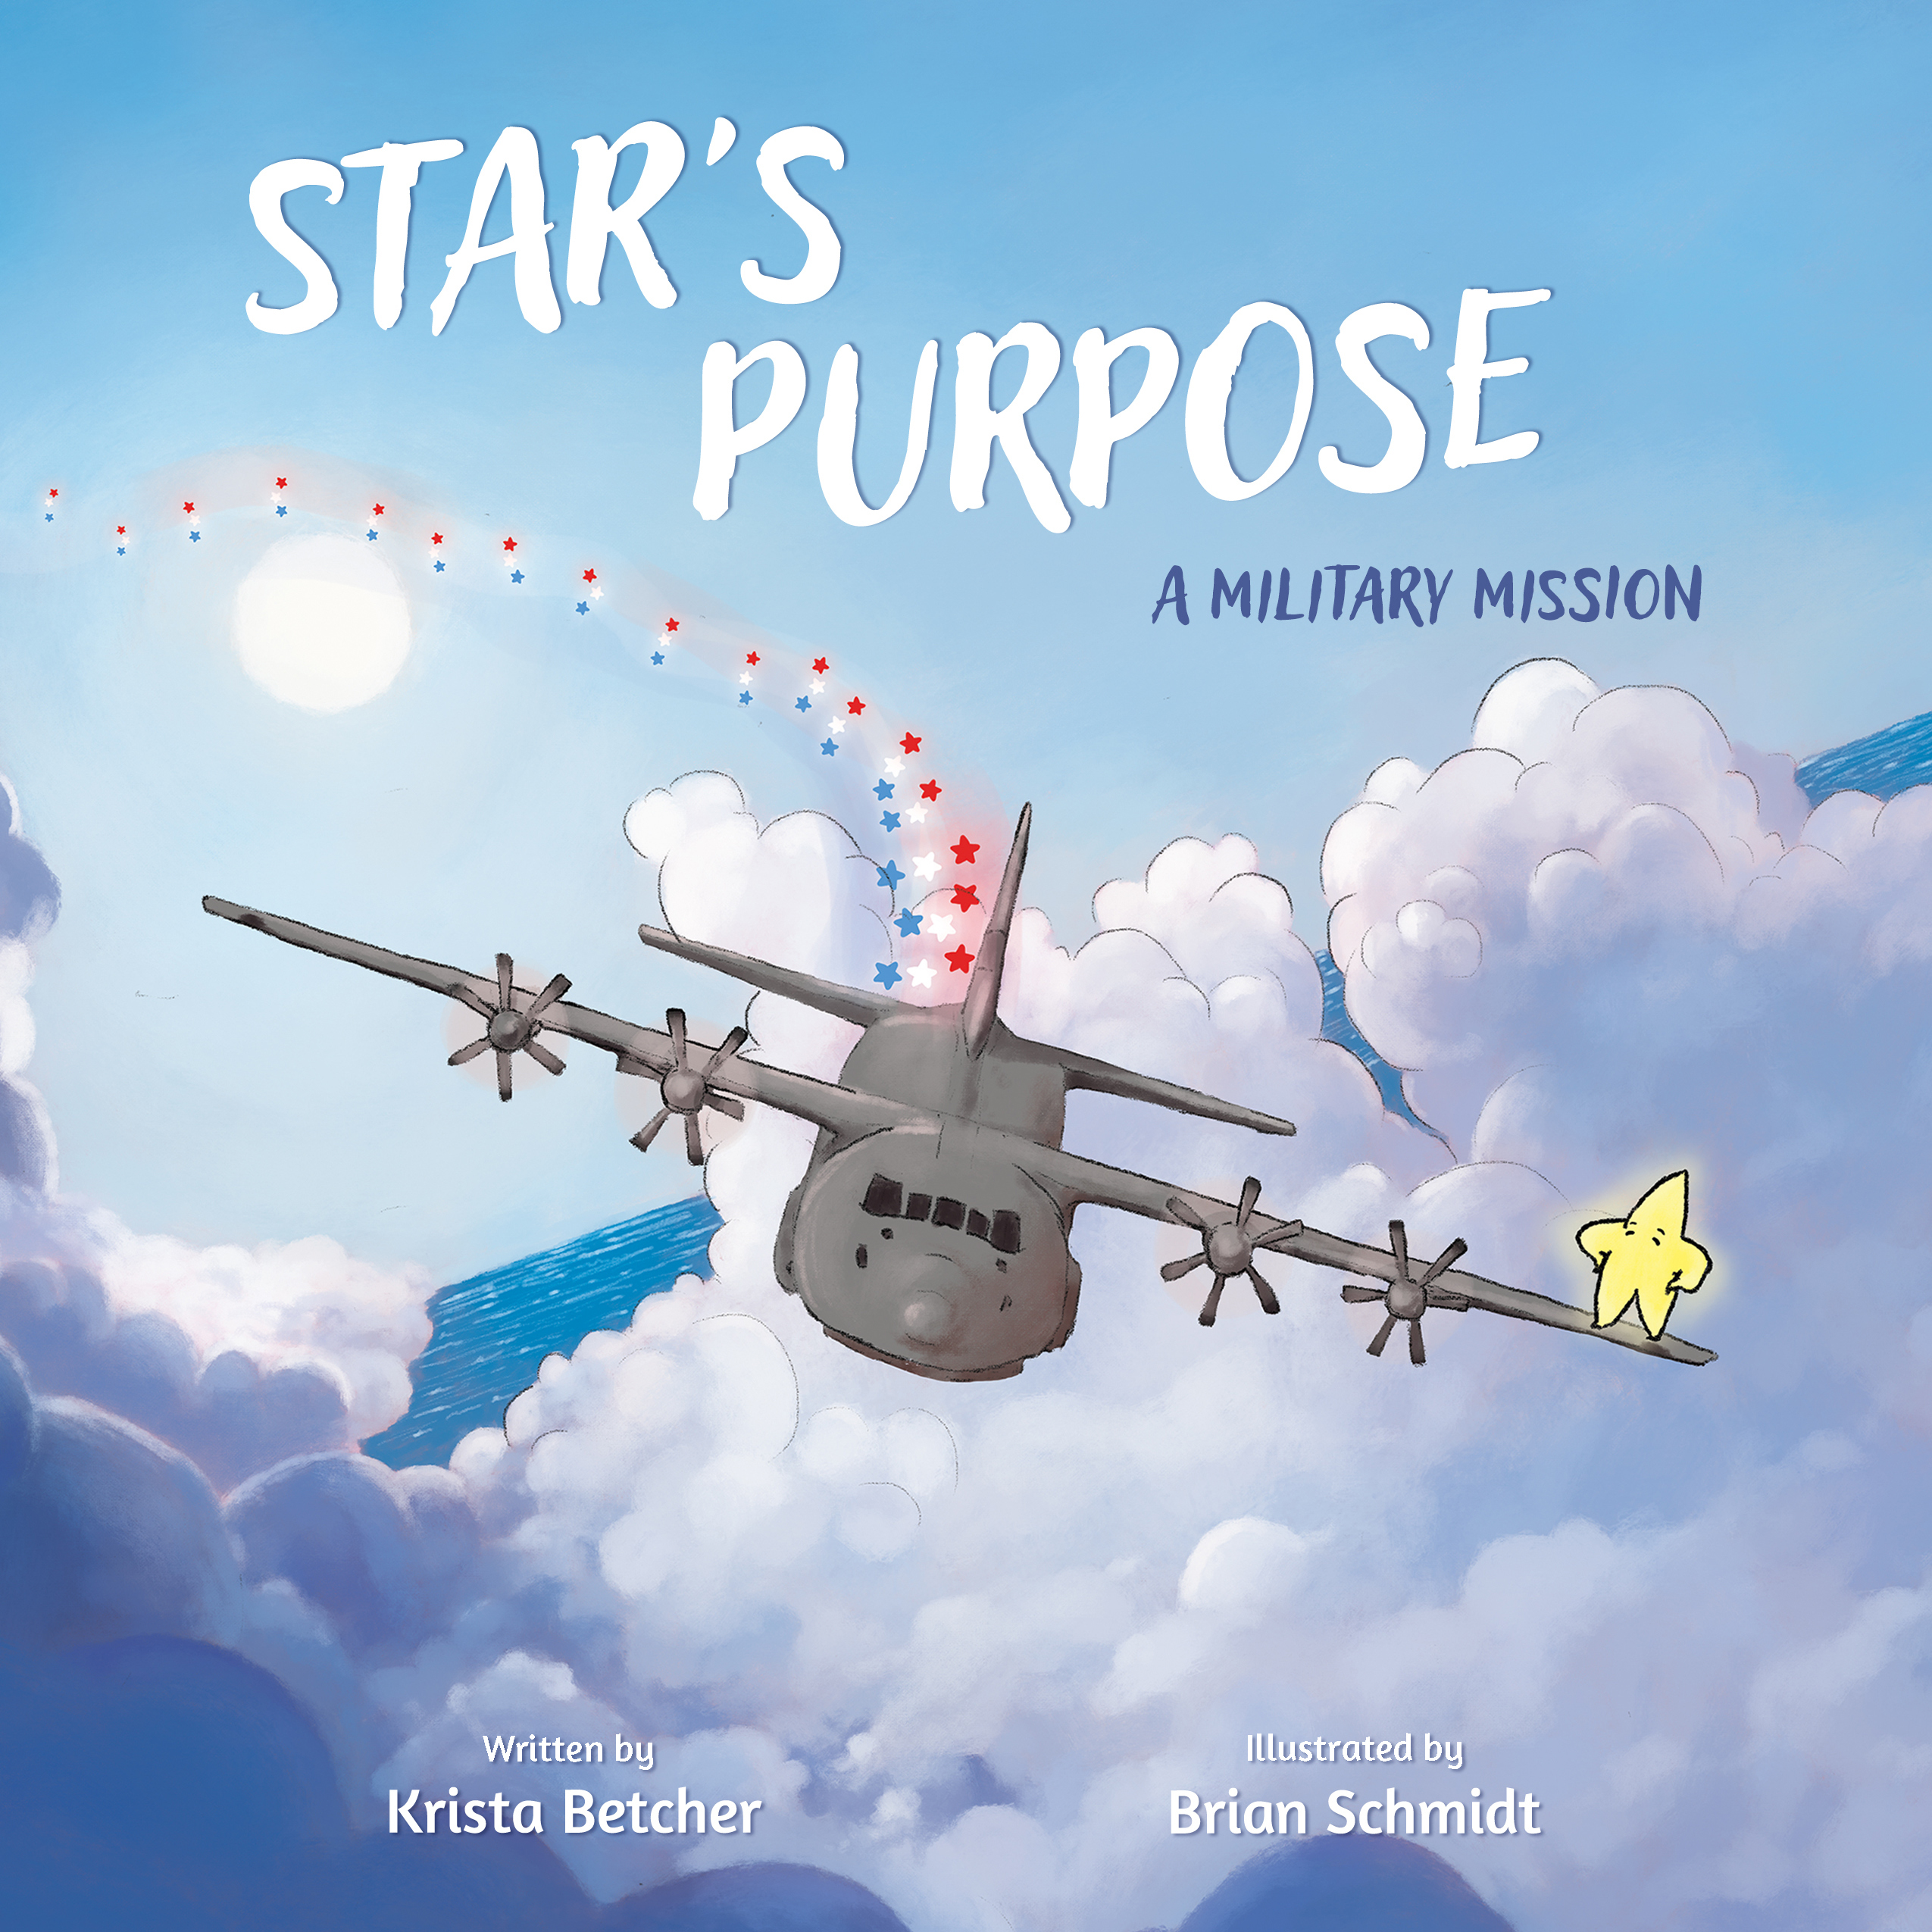 Cover for ISBN 9798887520278 Star's Purpose: A Military Mission by Krista Betcher, illustrated by Brian Schmidt, published by Elva Resa Publishing, distributed by Military Family Books